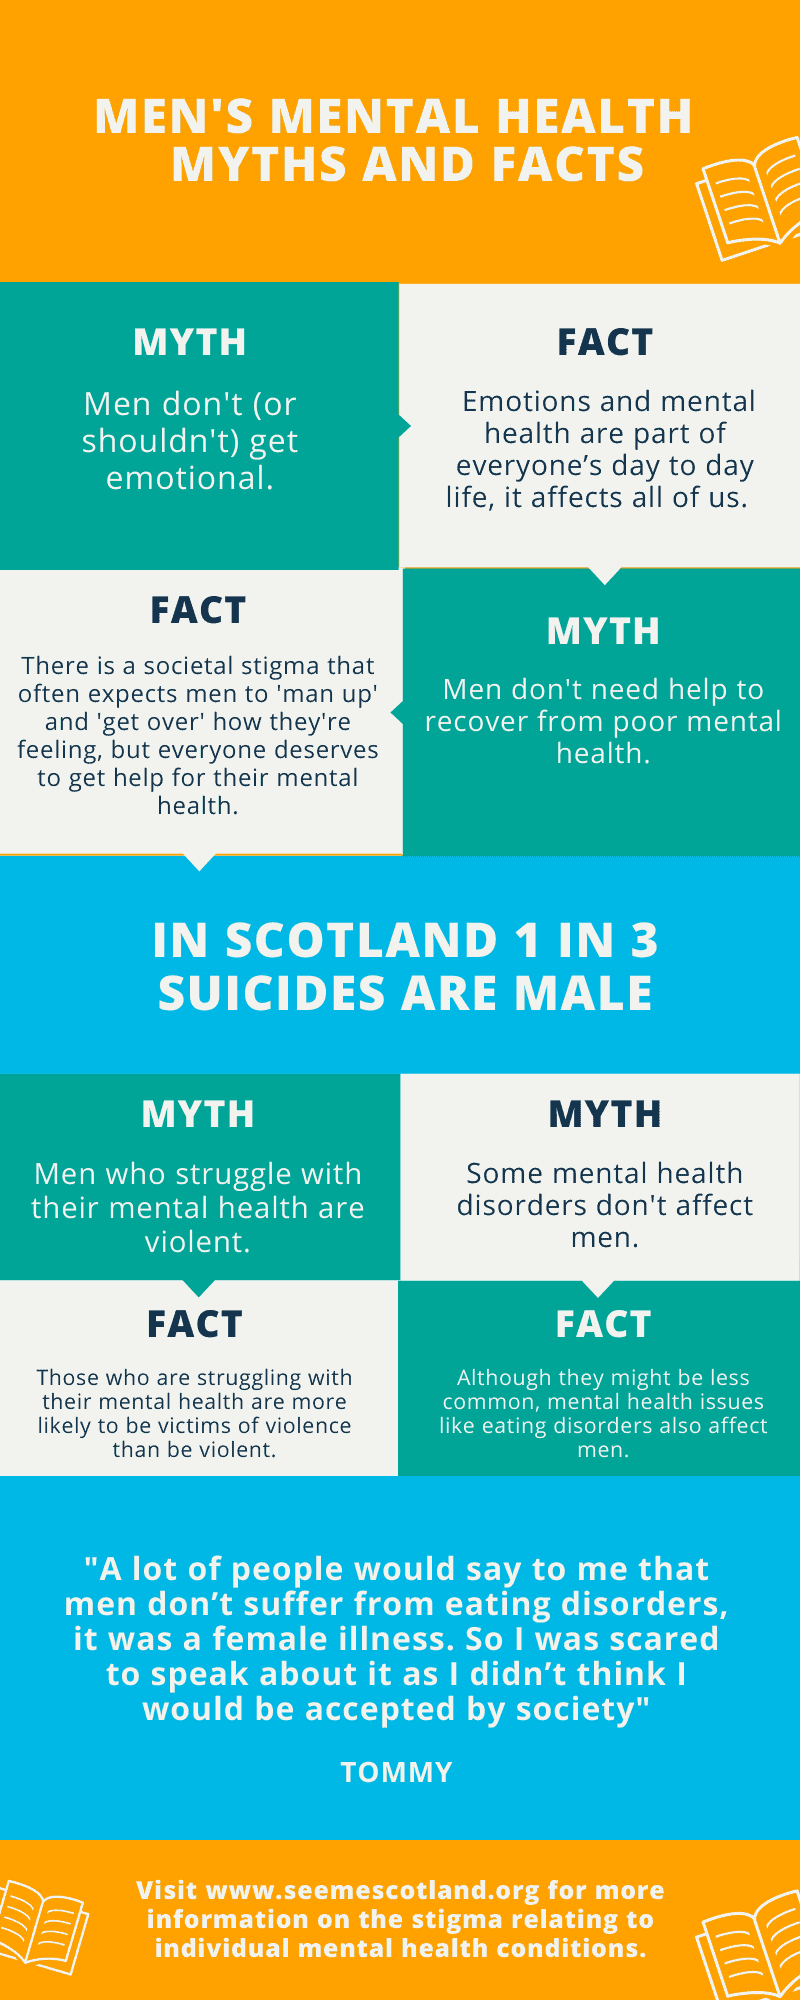 Men’s Mental Health Month: See Me Scotland Info and Resources